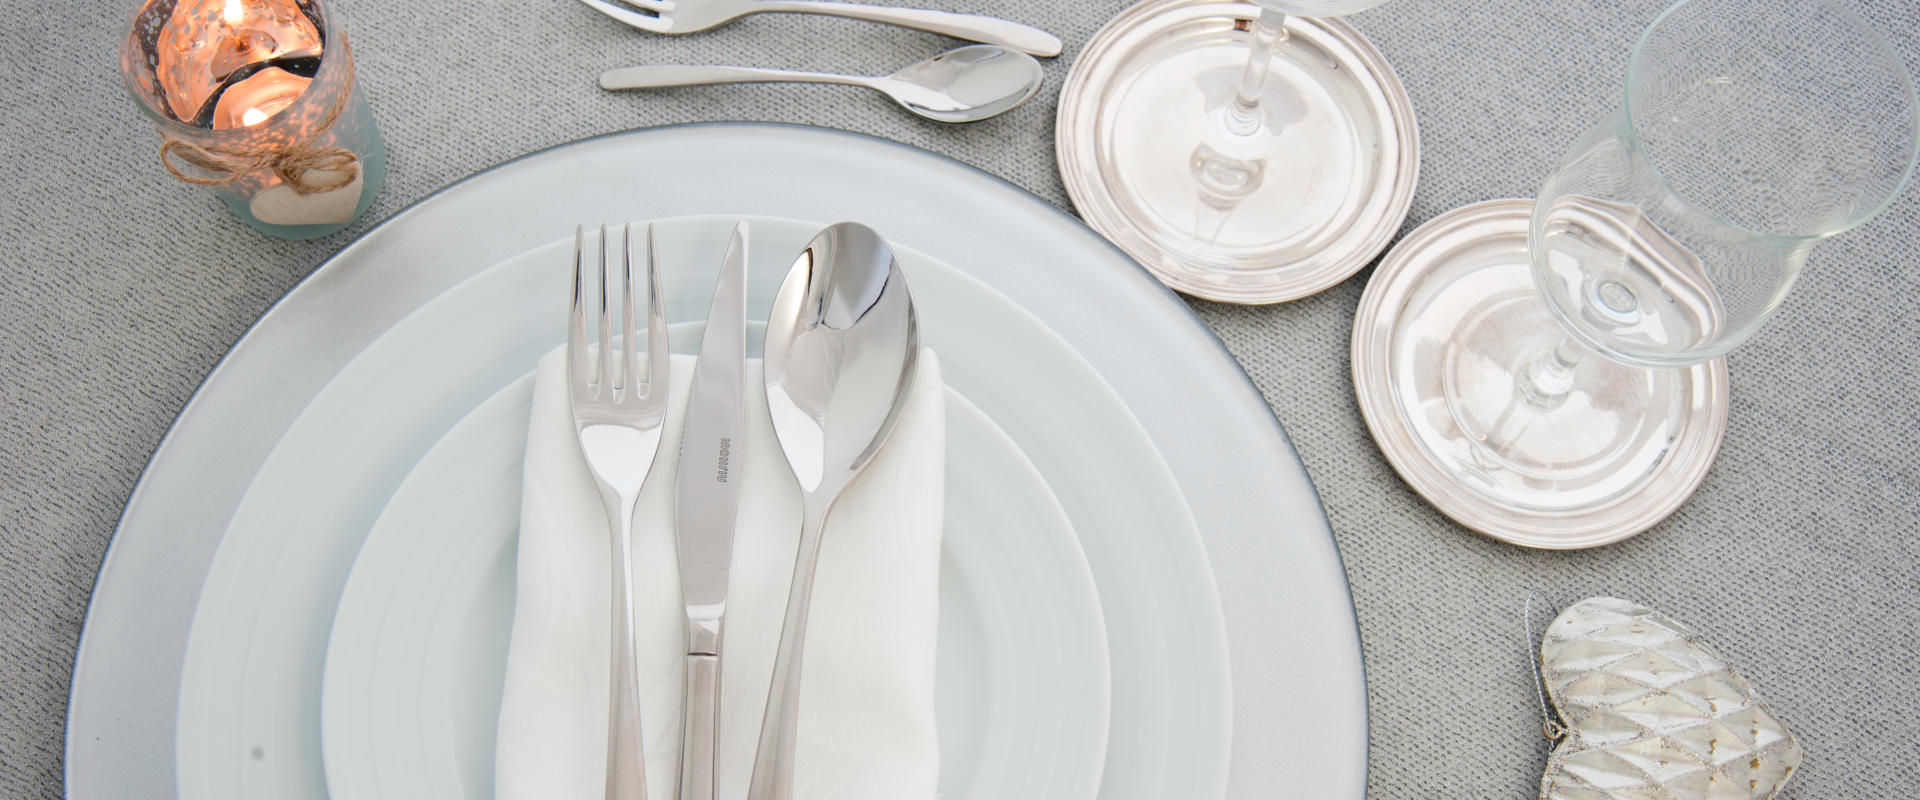 Cutlery, plates and glasses on set table